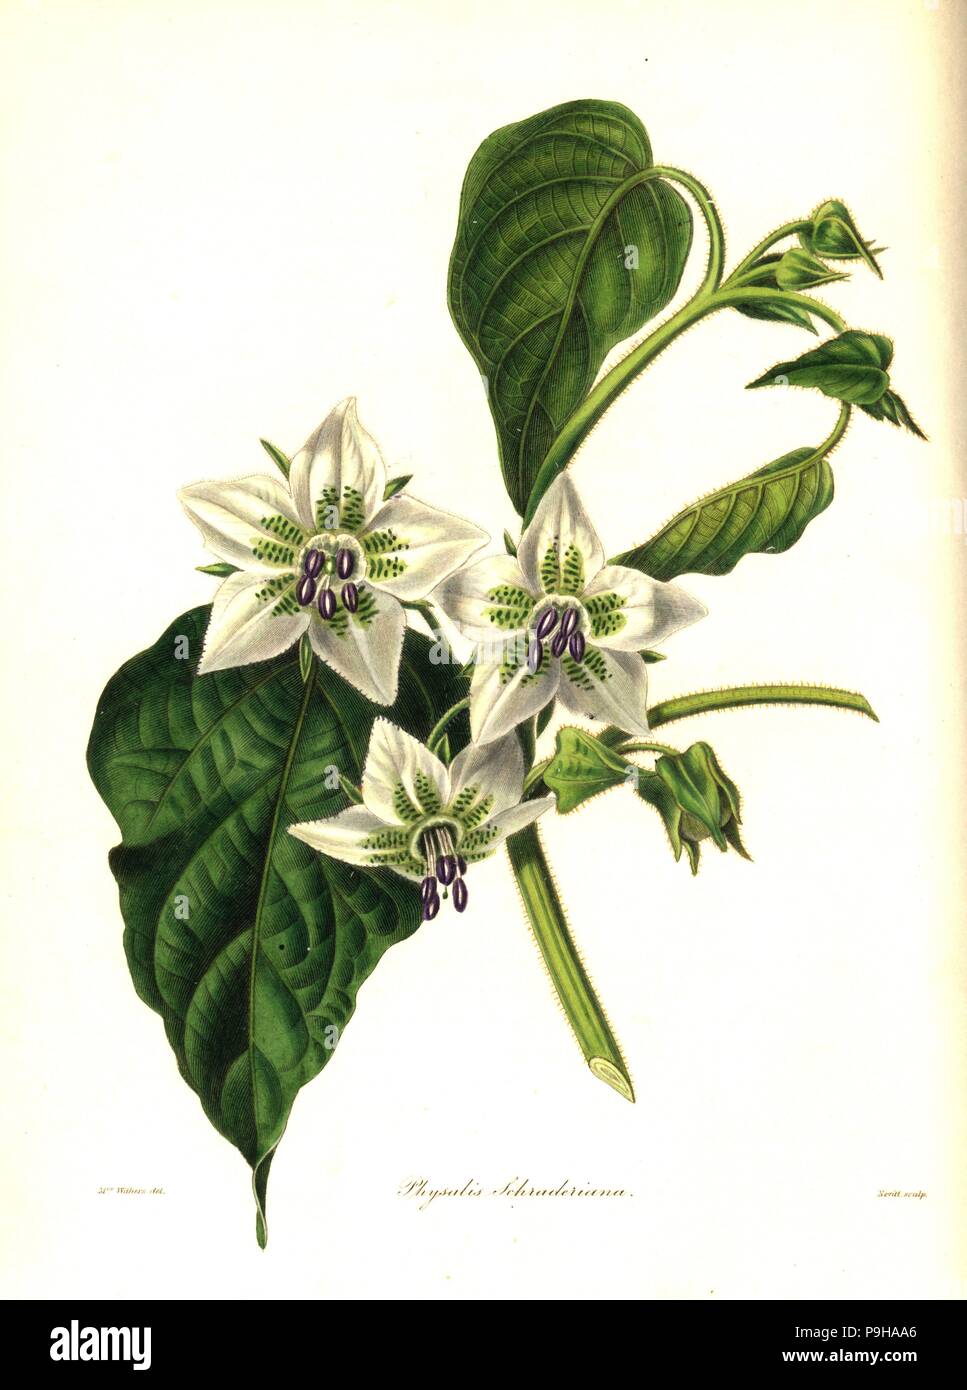 Five eyes, Chamaesaracha viscosa (Schrader's physalis, Physalis schraderiana). Handcoloured copperplate engraving by S. Nevitt after a botanical illustration by Mrs Augusta Withers from Benjamin Maund and the Rev. John Stevens Henslow's The Botanist, London, 1836. Stock Photo